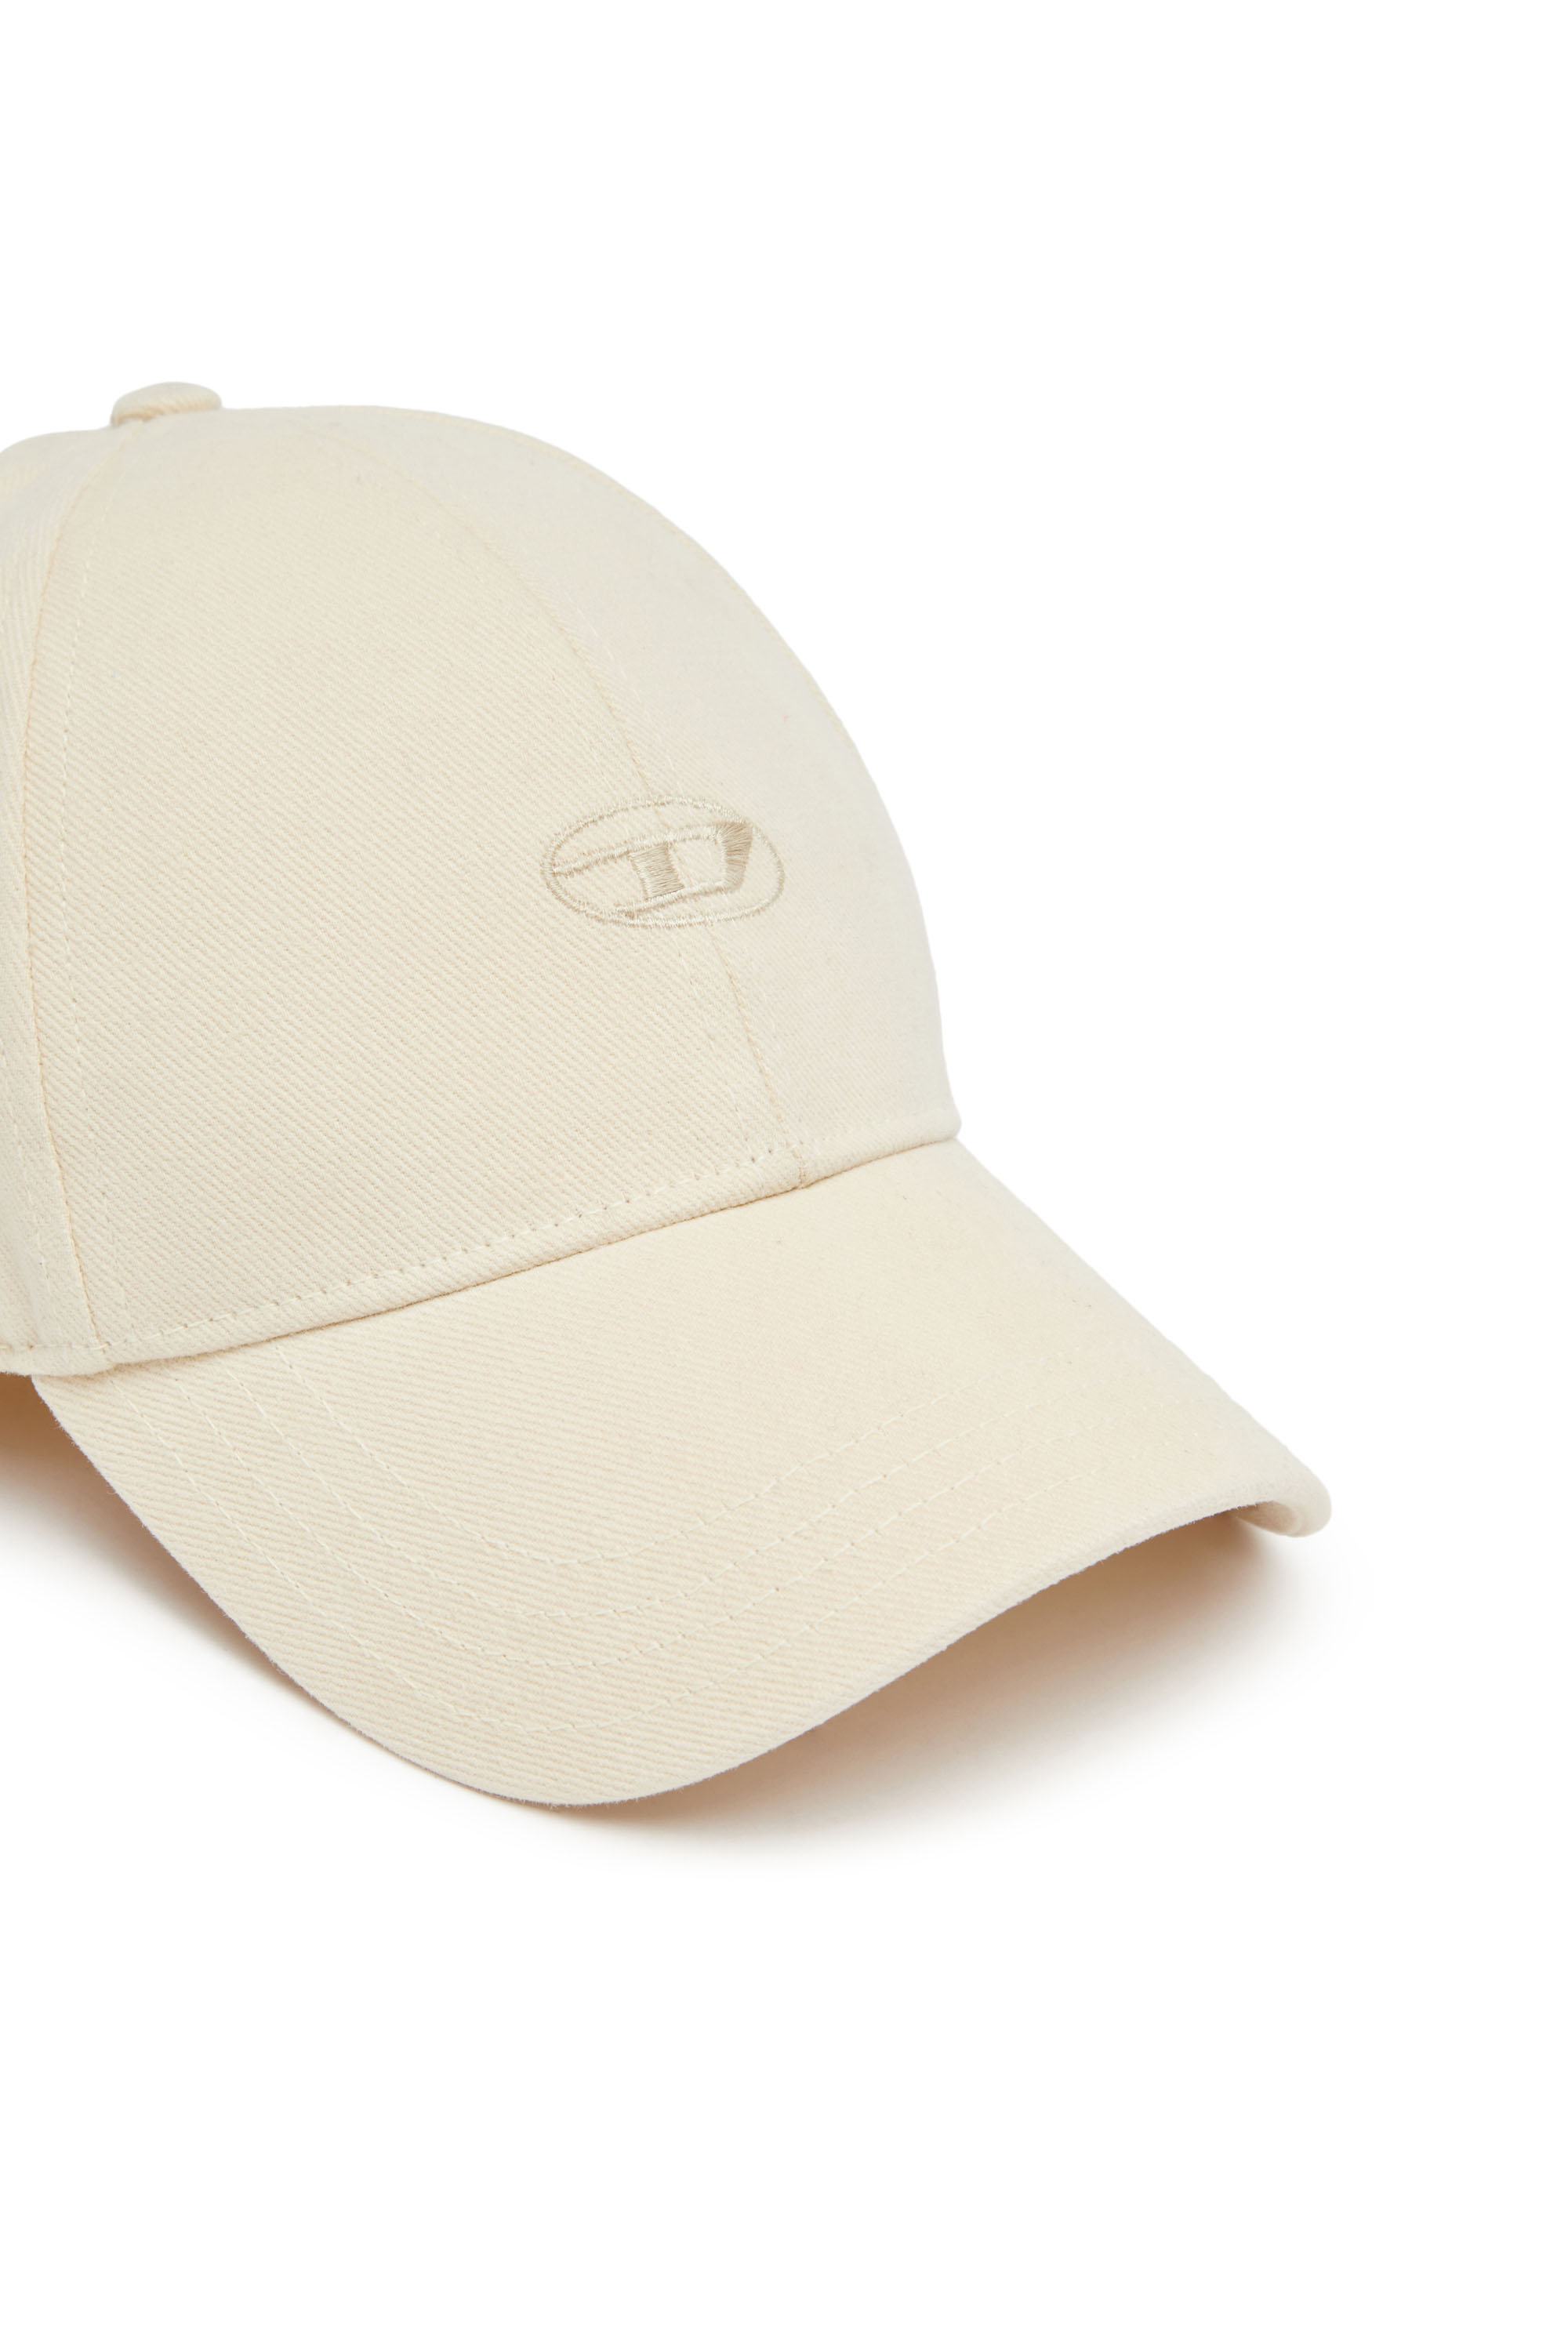 Diesel - C-RUN-WASH, Male Baseball cap in washed cotton twill in White - Image 3